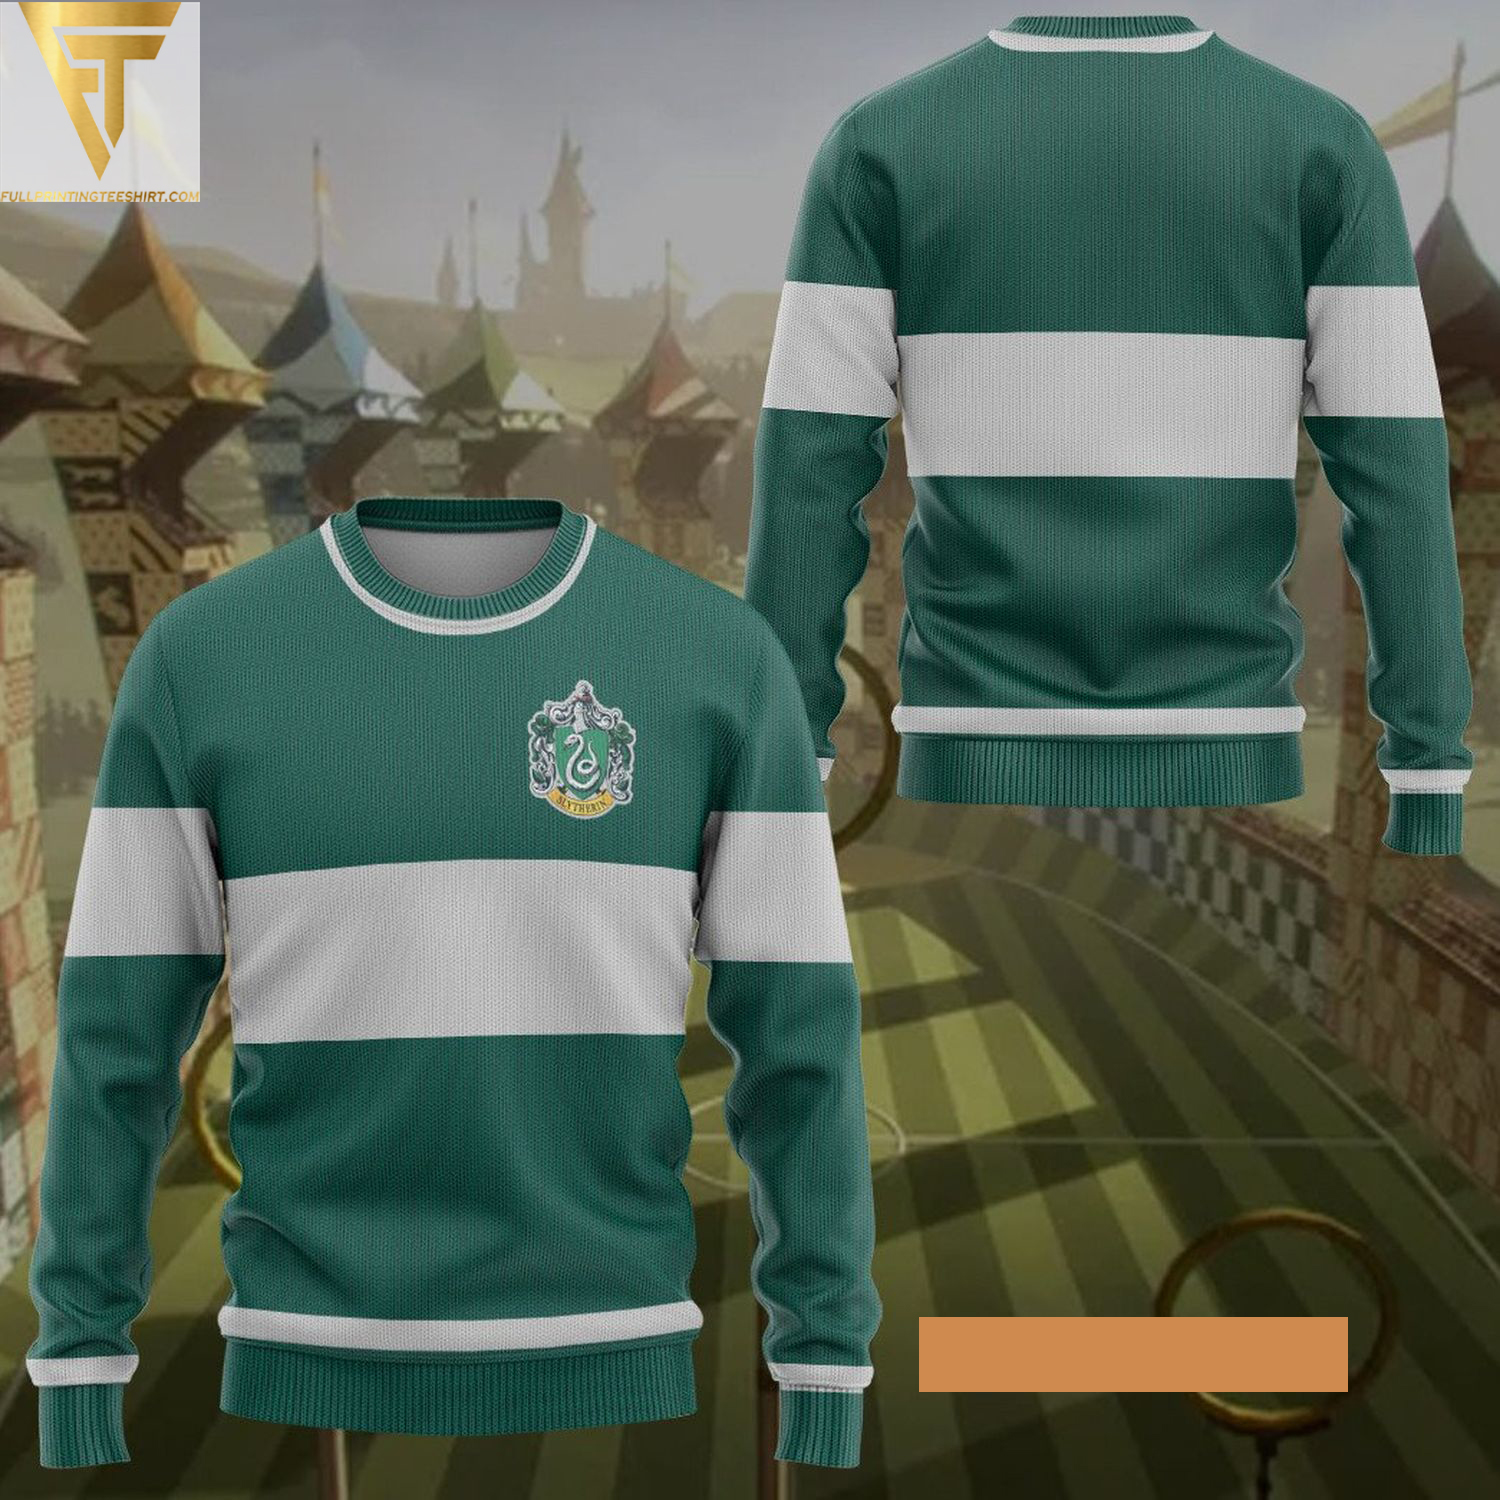 Harry potter slytherin quidditch ugly christmas sweater - Copy (2)